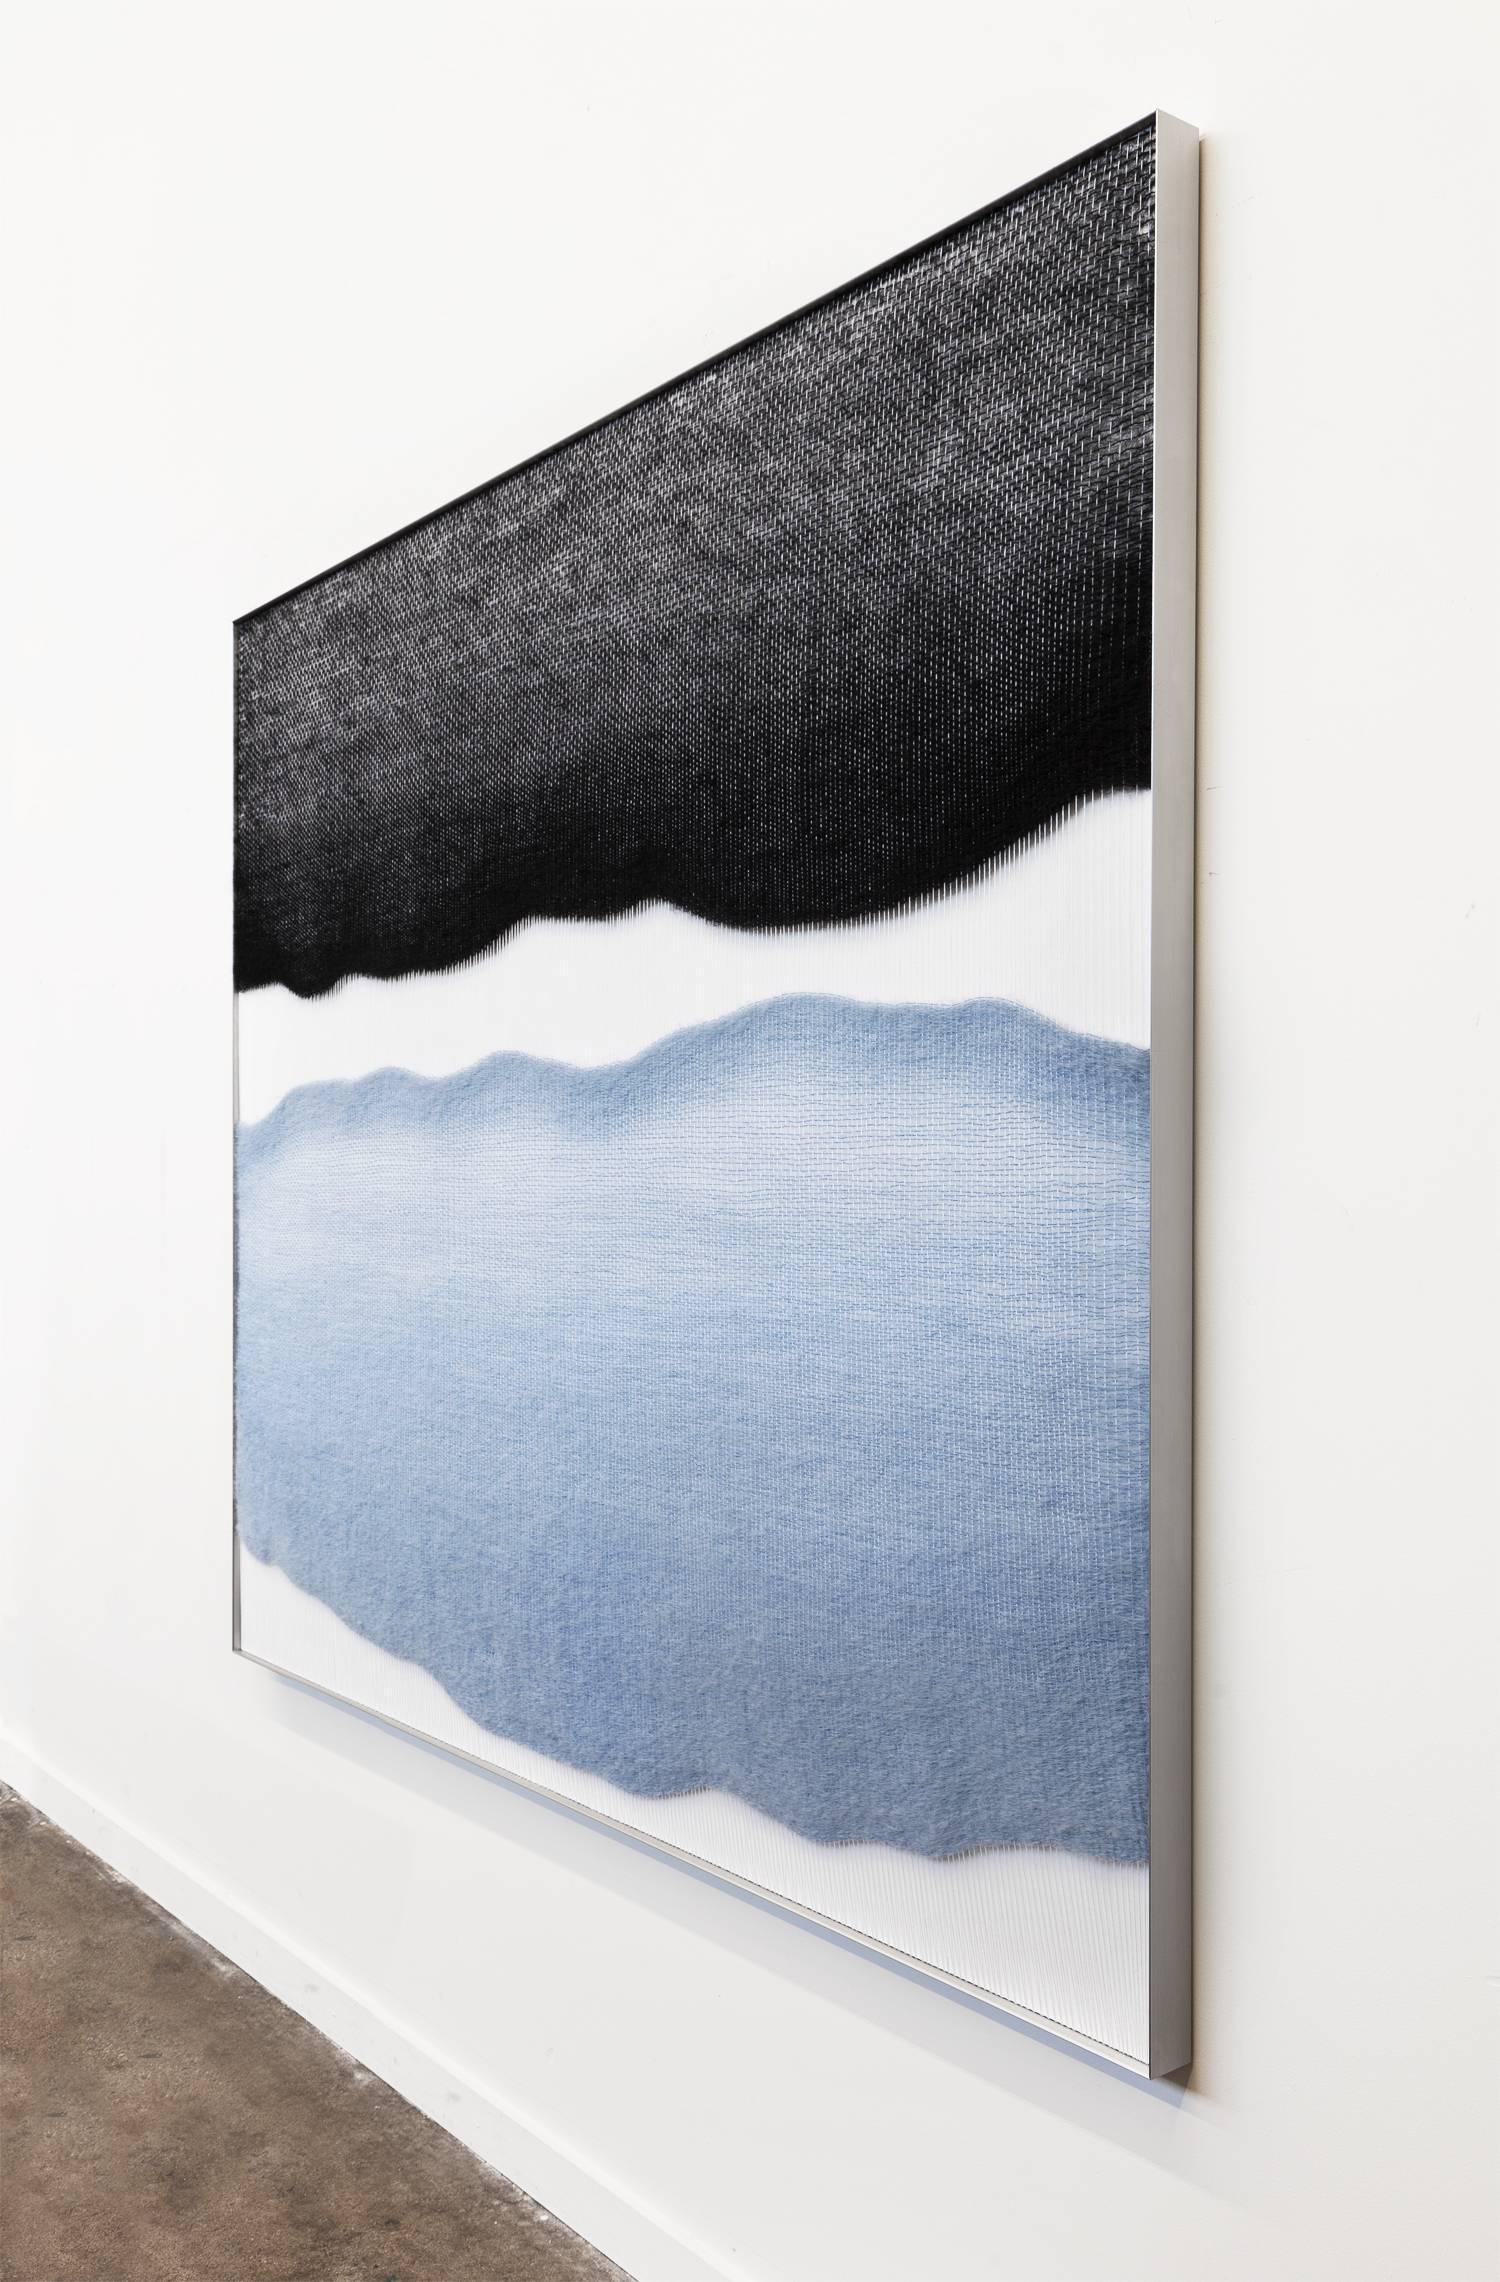 Minimalist Contemporary Handwoven Wall Fiber Art, Pale Blue and Black by Mimi Jung